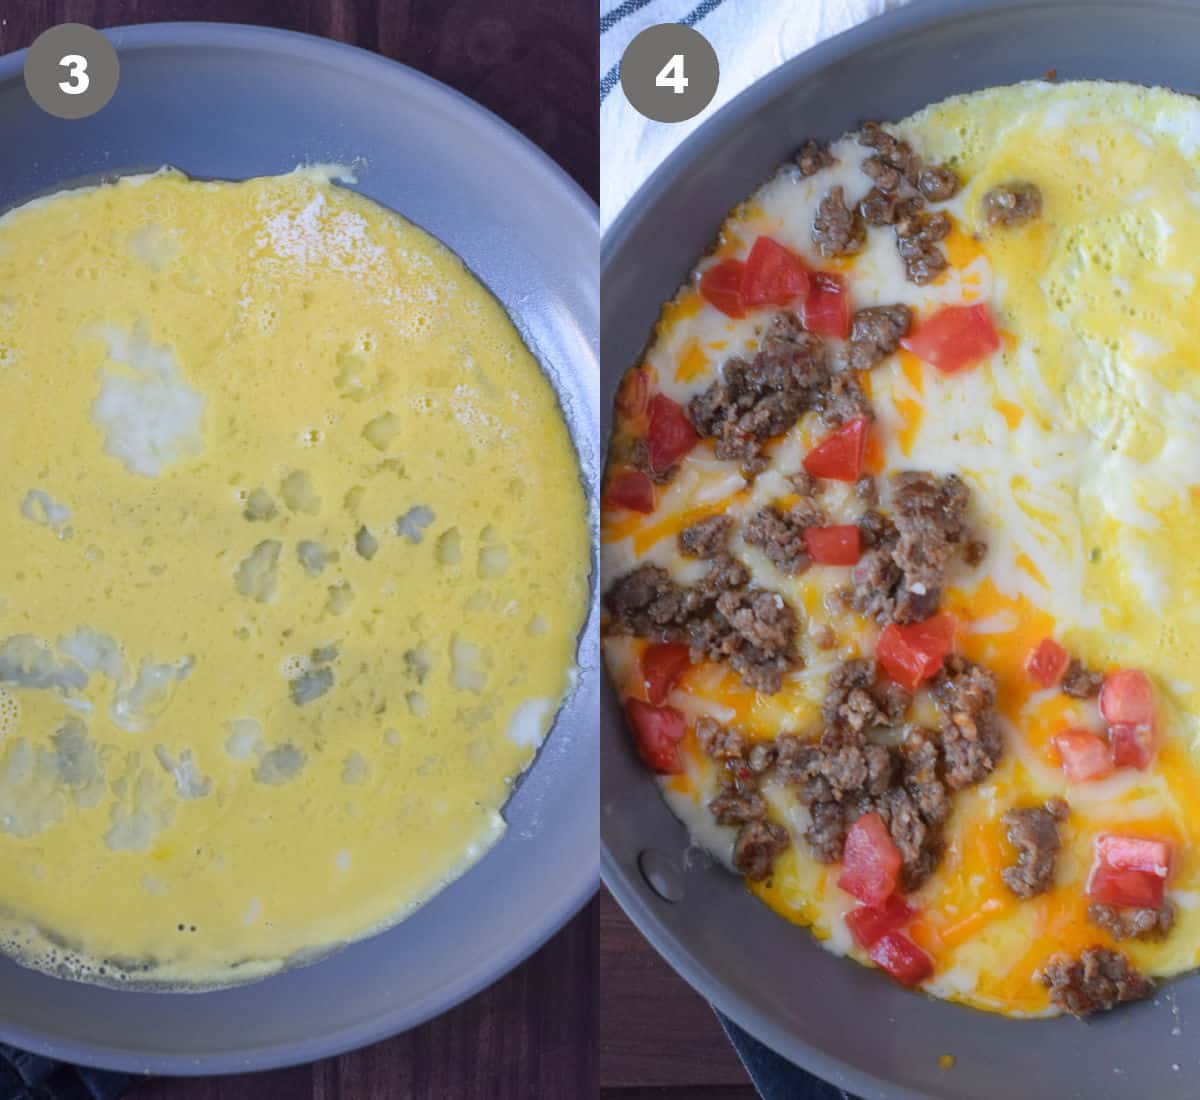 Eggs poured into a skillet then the filling added on top on one side.